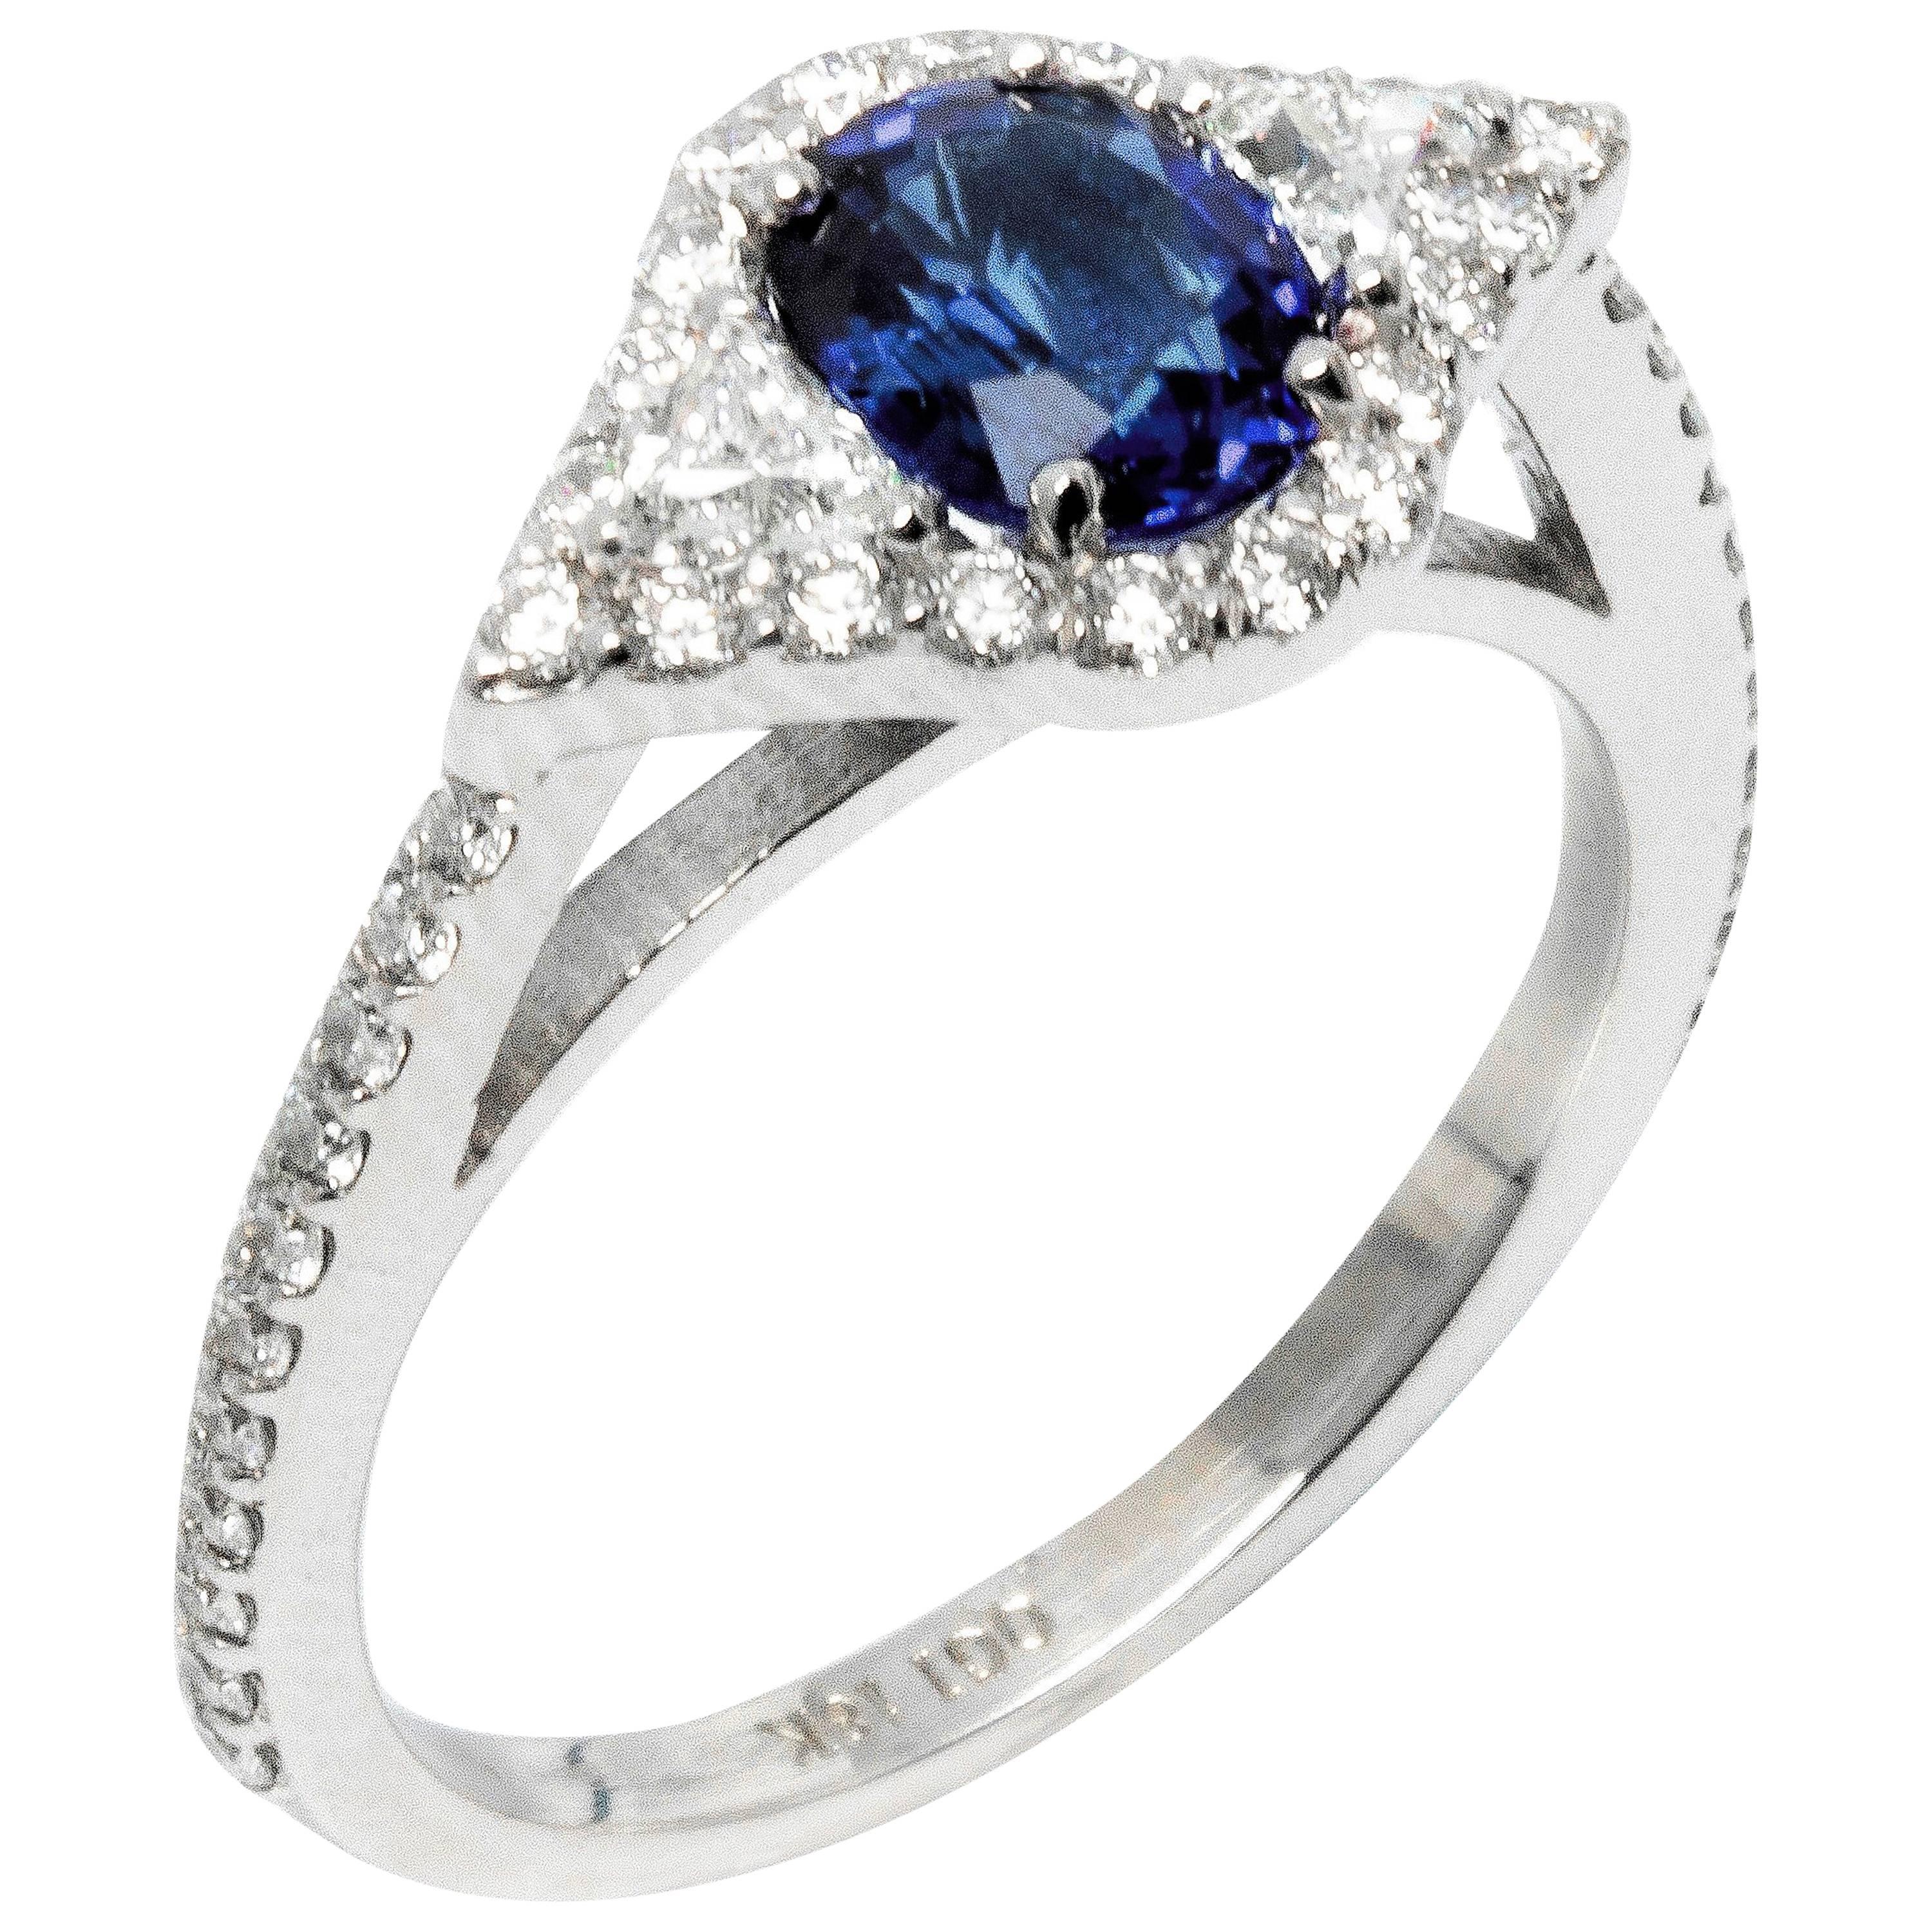 Featuring 18k white gold engagement ring with one carat sapphire and surrounded with melee diamonds. 
Sapphire Weight 1.00 carat
Trillion diamonds weighing 0.25 carats 
Round diamond weighing 0.70 carats.
Diamond quality G VS
New ring 
Ring can be